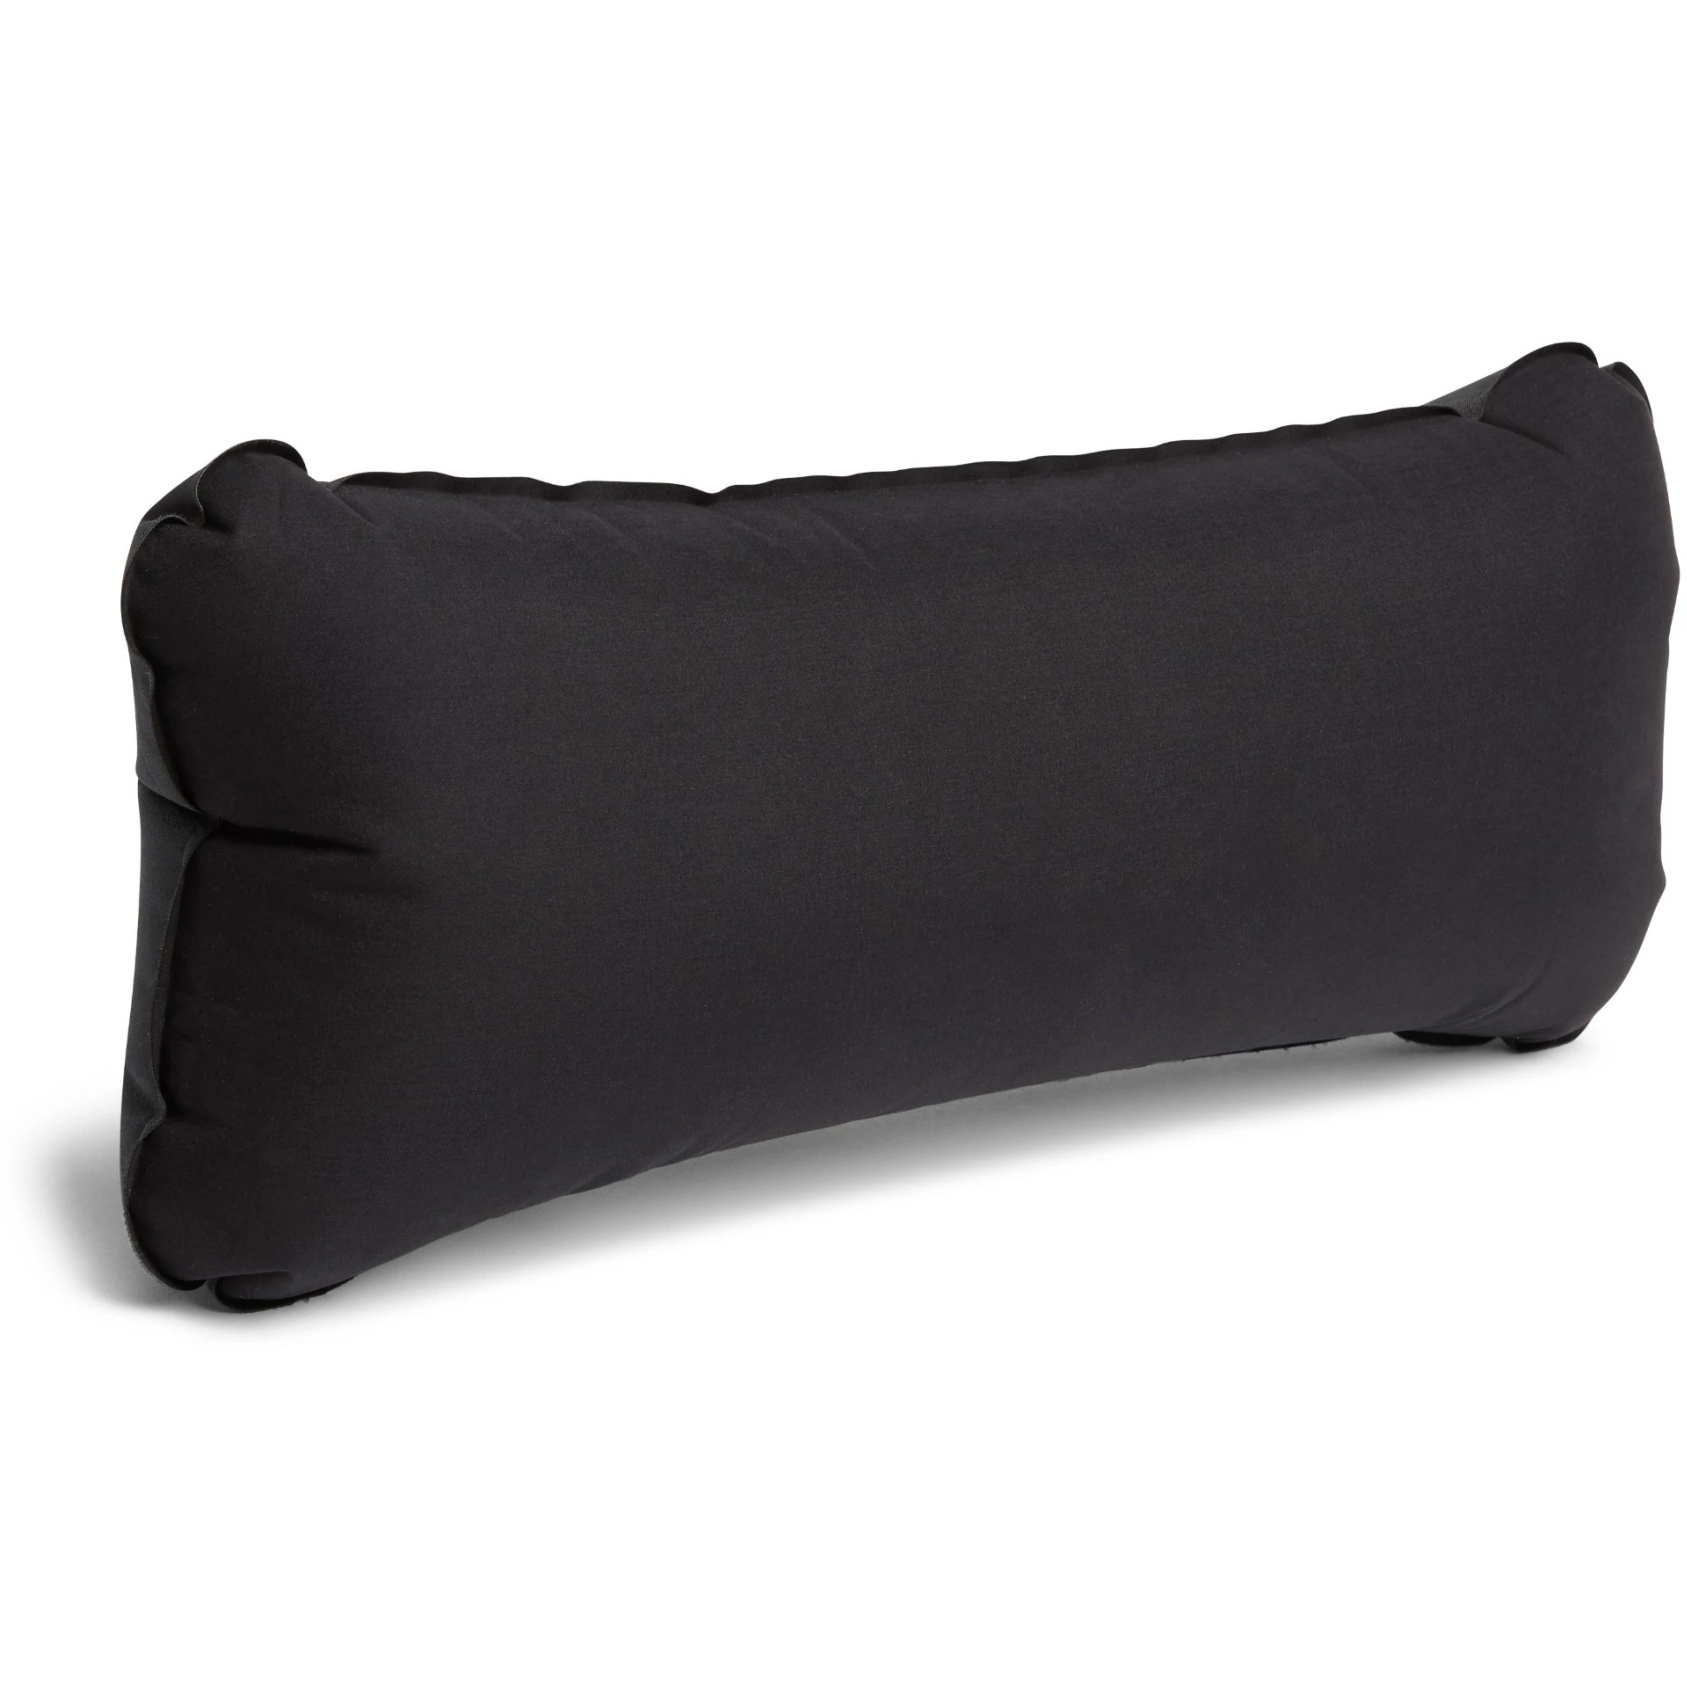 Picture of Helinox Air Headrest Pillow - black